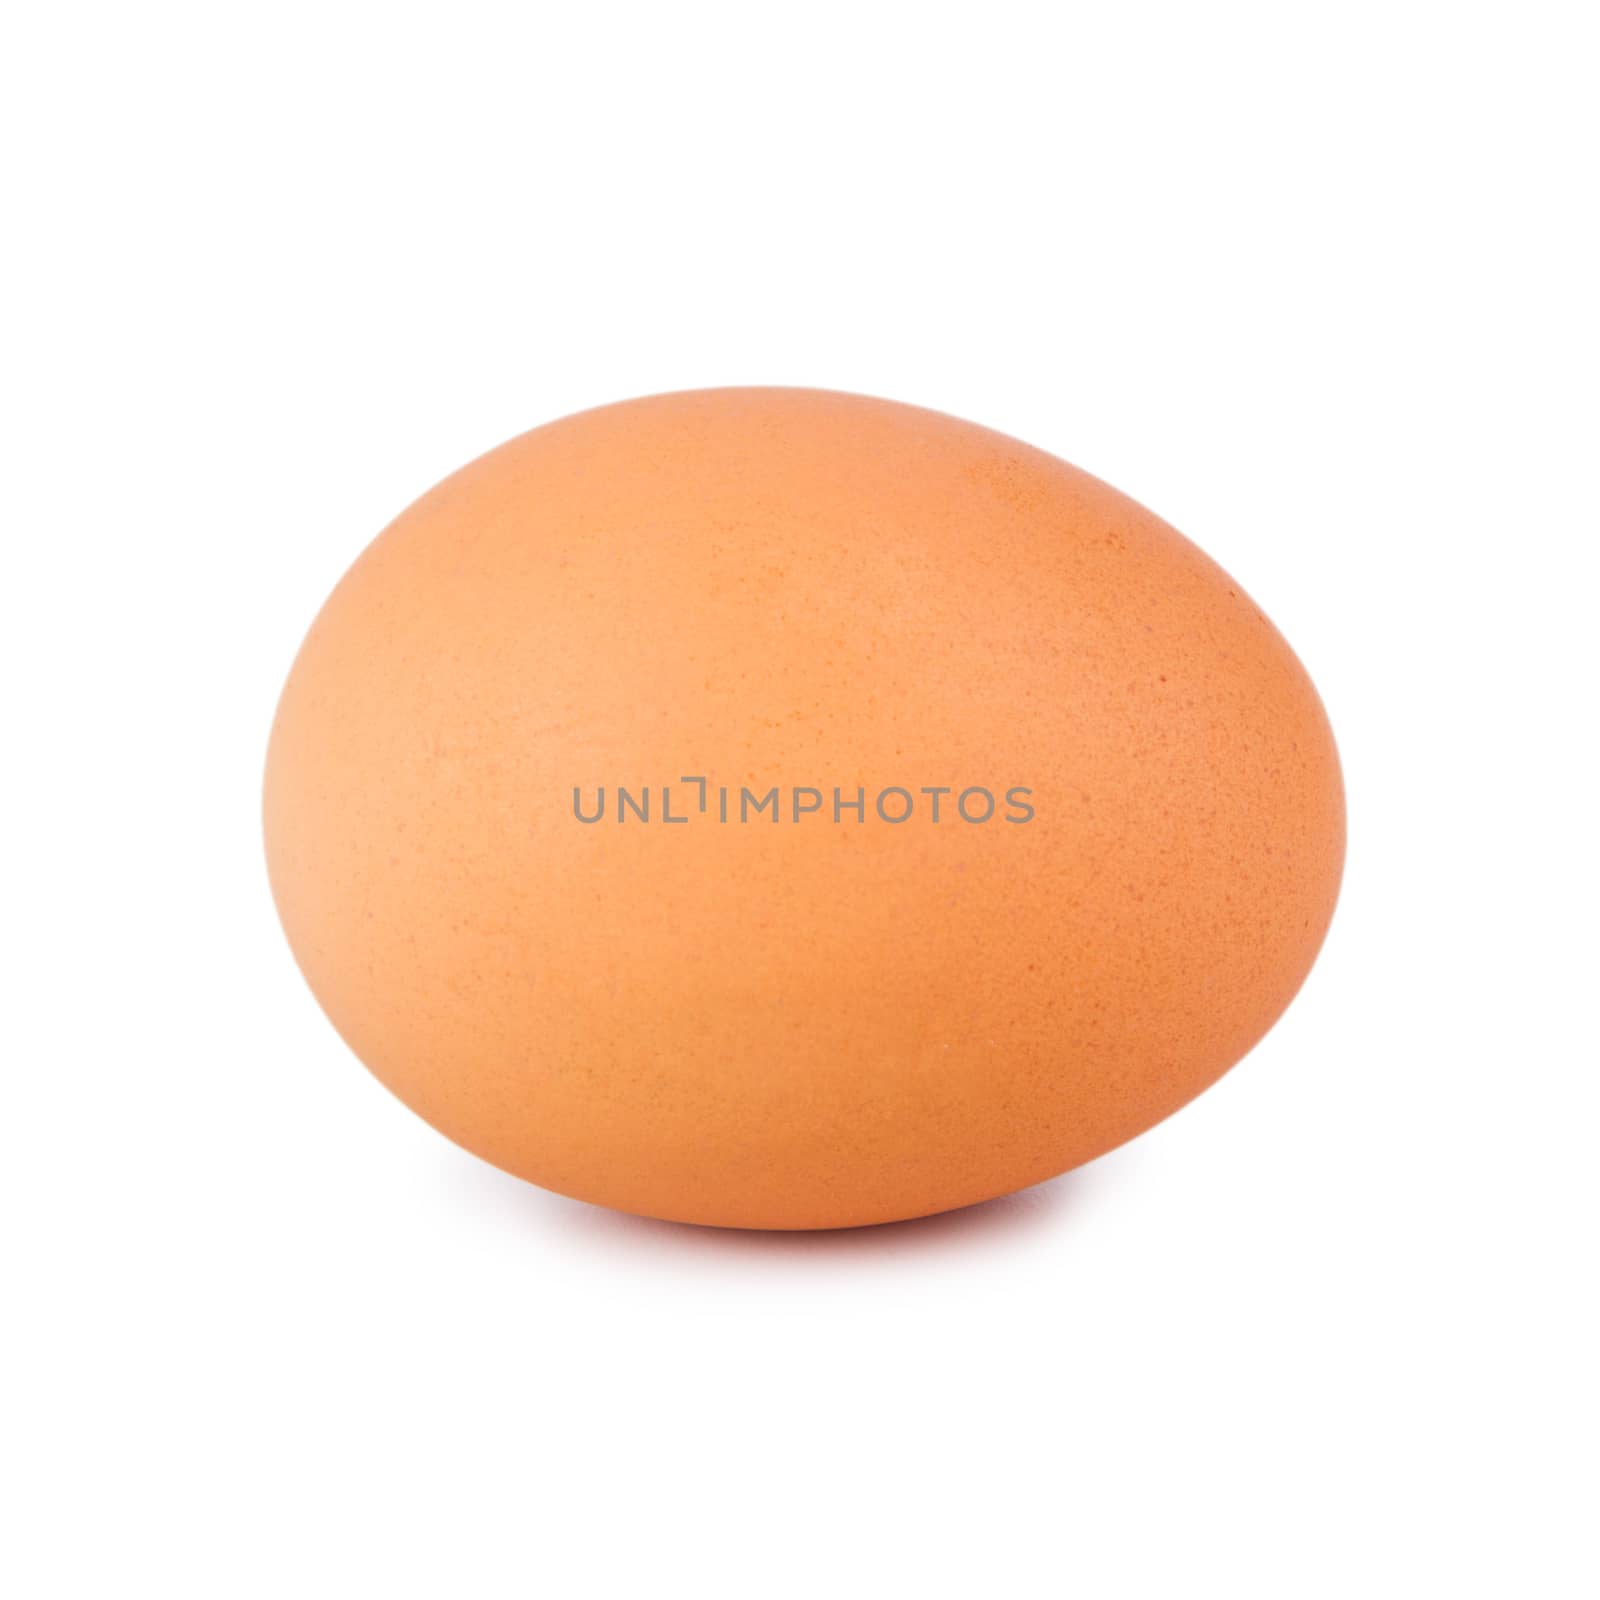 Fresh brown egg isolated on a white background